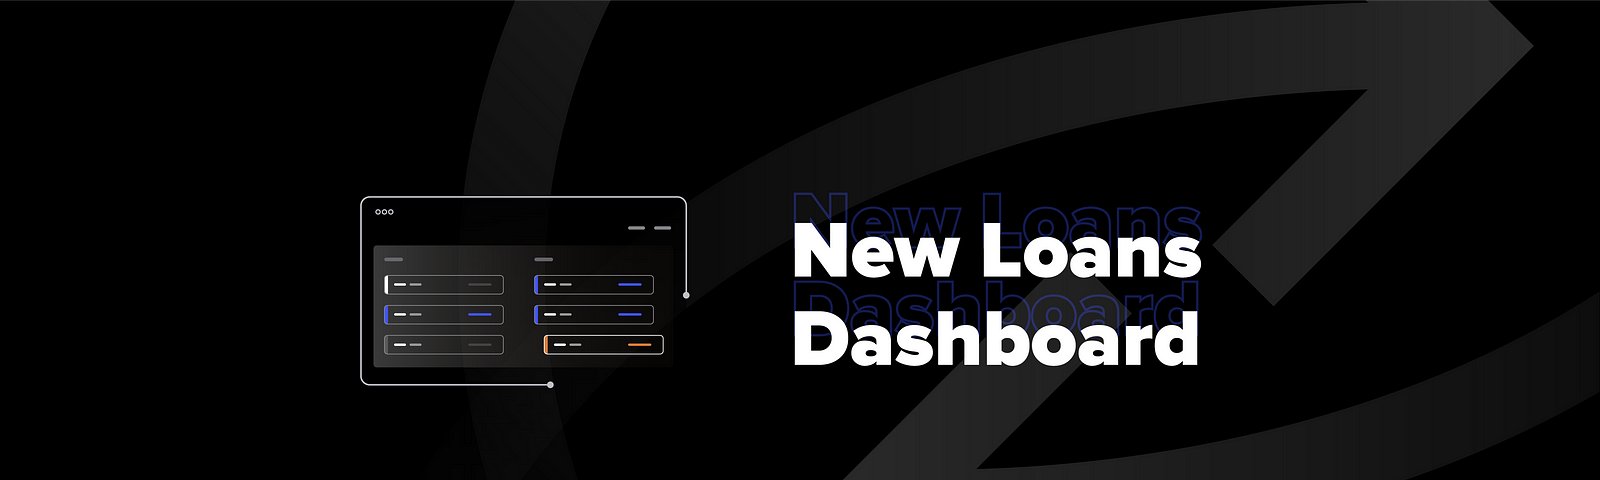 Users can manage all their loans in the new dashboard!